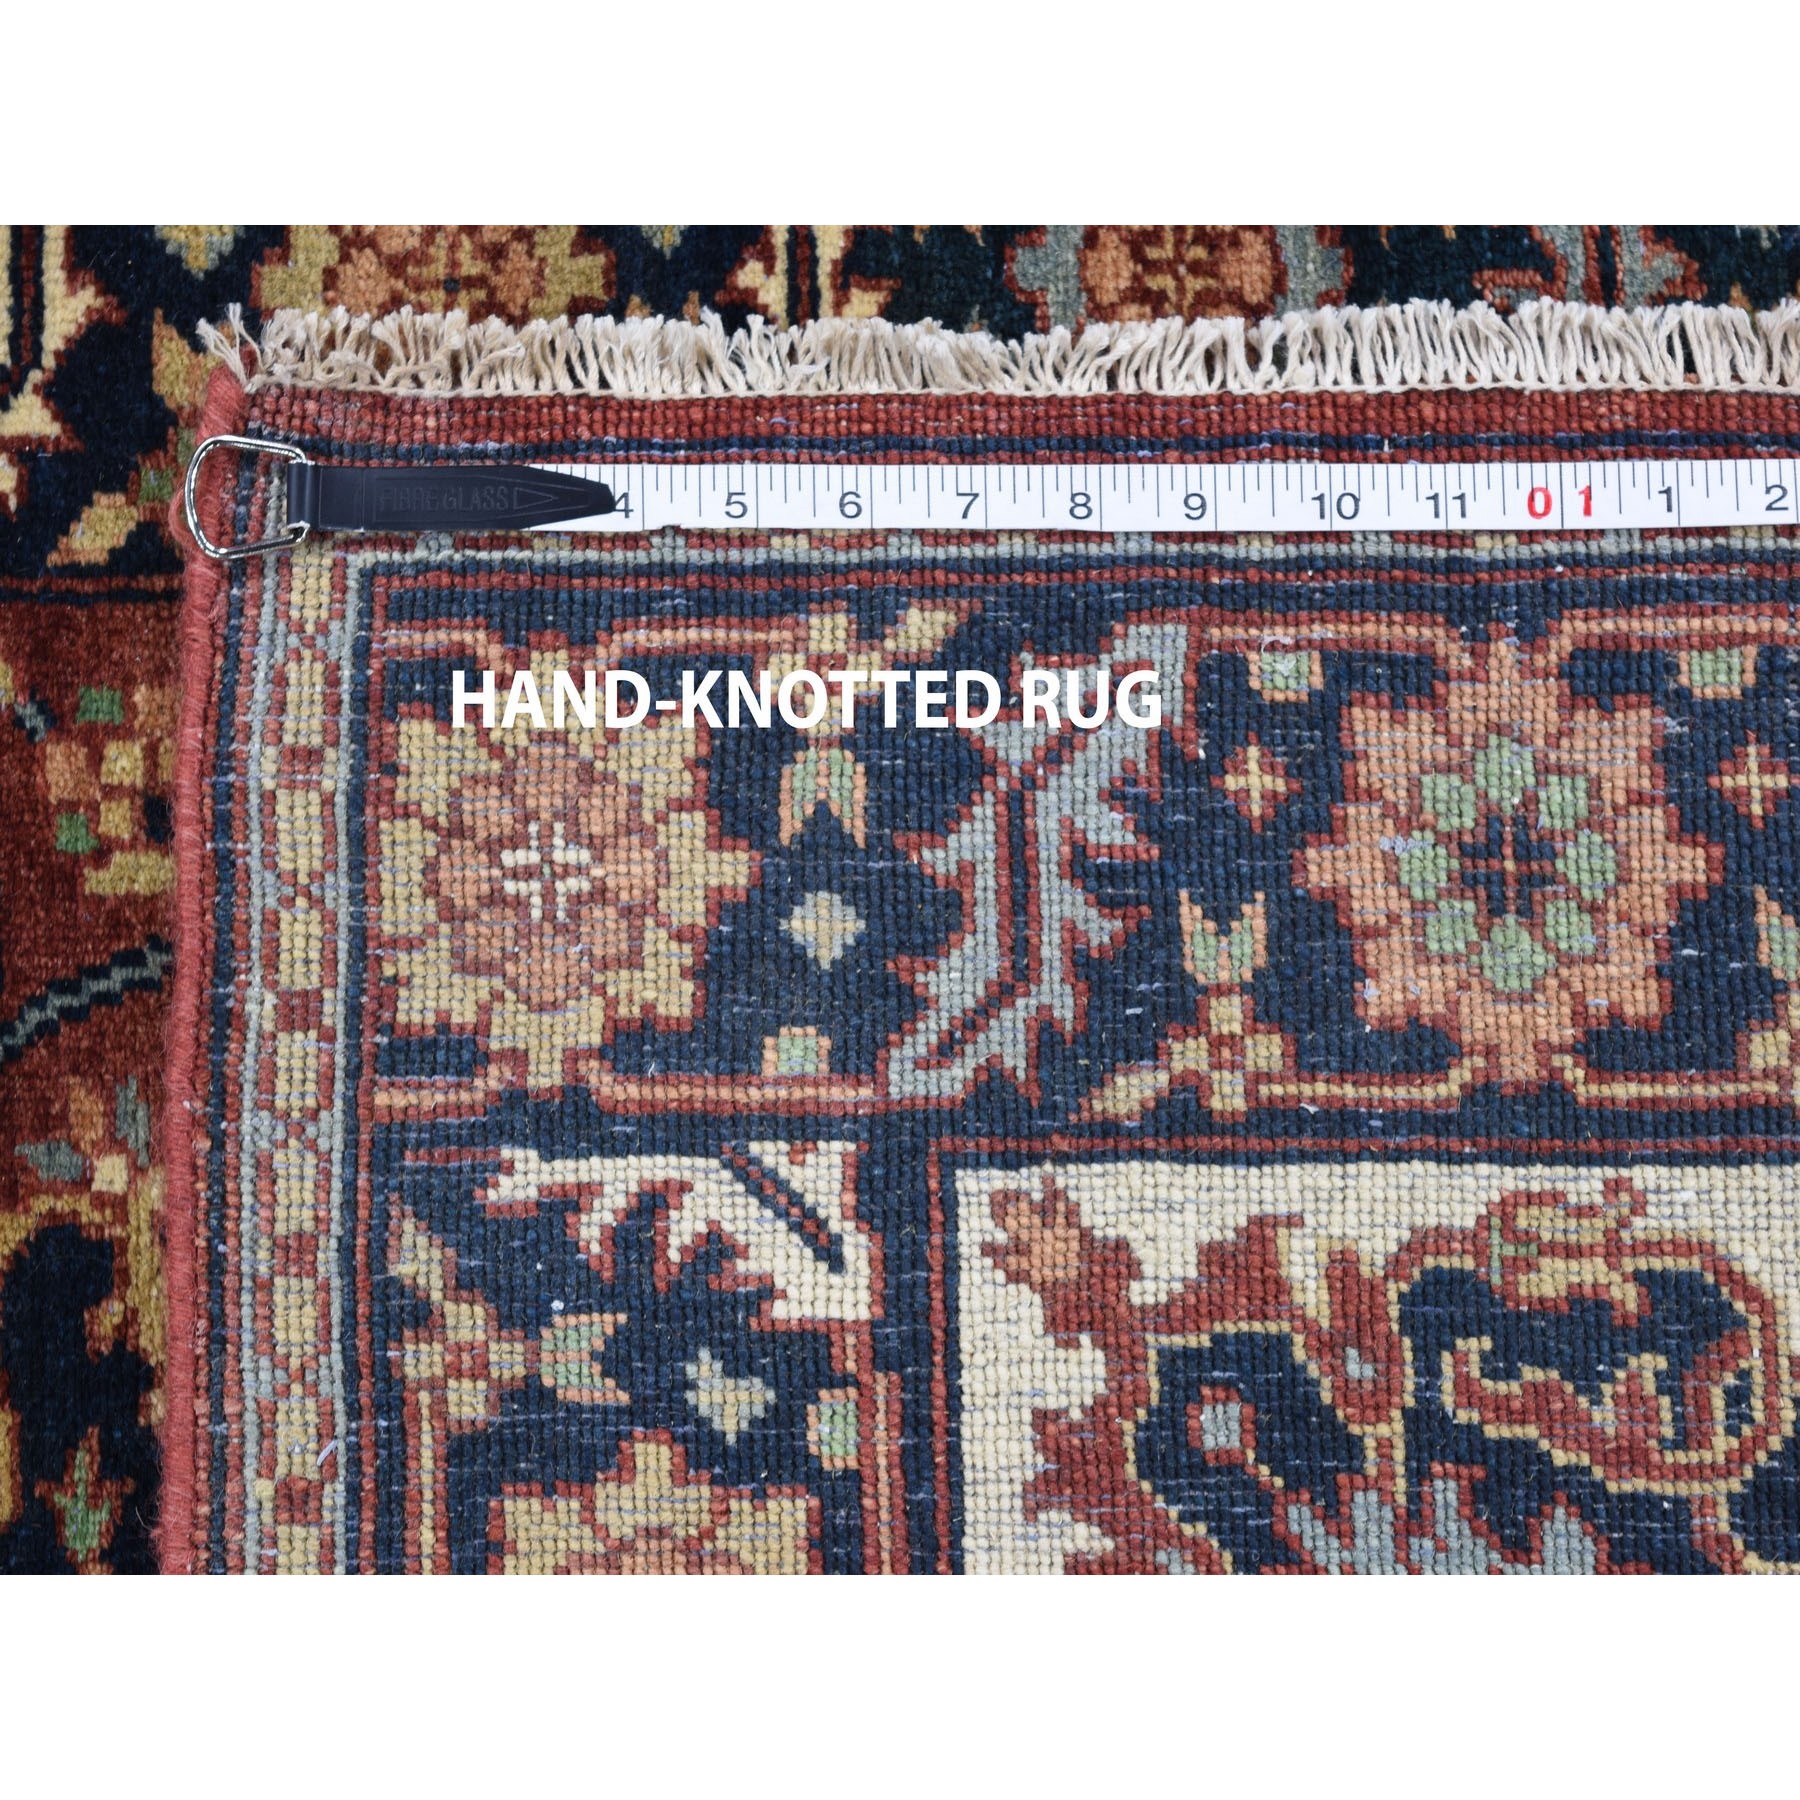 3-2 x5-2  Antiqued Heriz Re-creation Hand Knotted Pure Wool Oriental Rug 